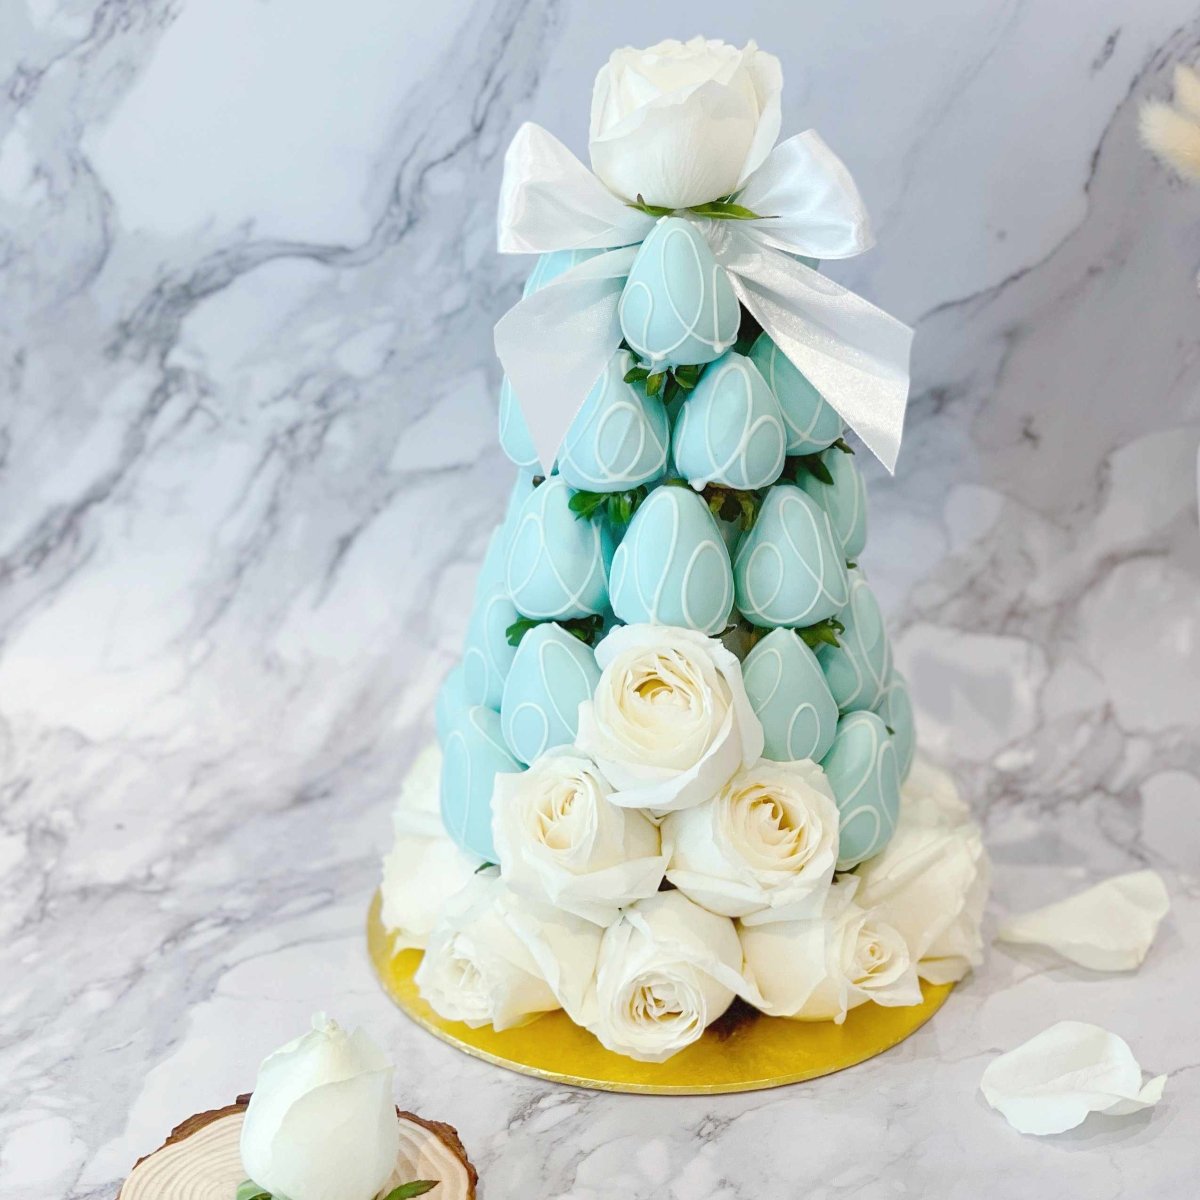 Tiffany Blue Strawberry Tower | Fresh Fruit Arrangement with Chocolate Dipped Strawberry & Rose Flower Arrangements - Rainbowly Fresh Fruit Gift and Flower Arrangments